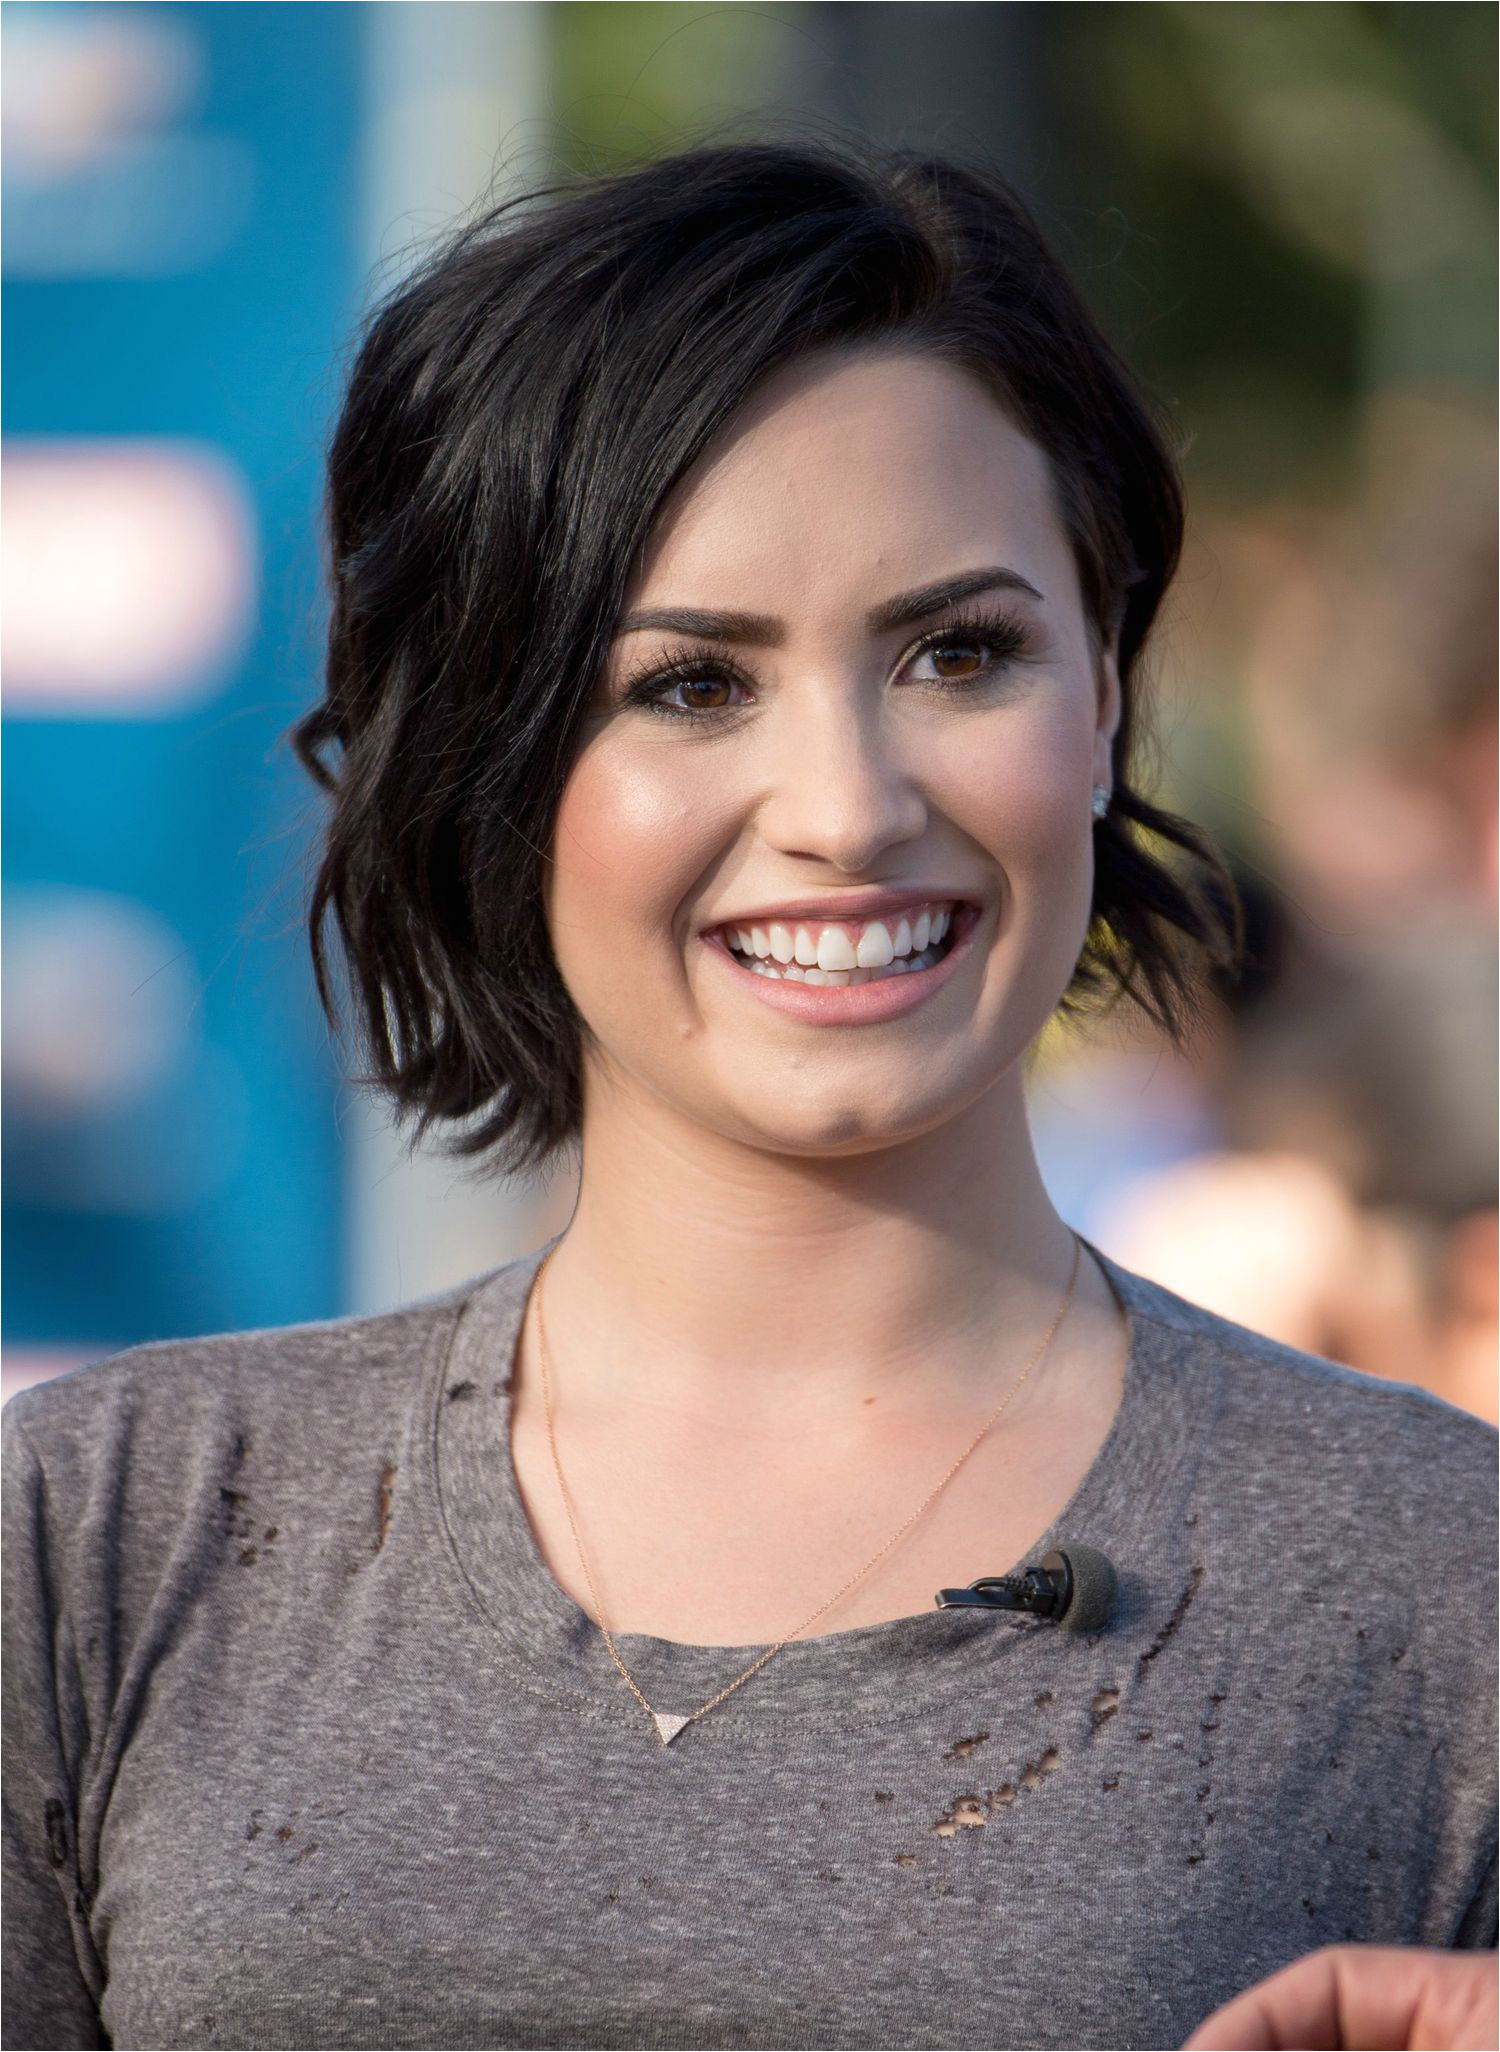 Bob Hairstyles Demi Lovato Demi Lovato S Haircut is Crazy Cute Take A Look From Every Angle